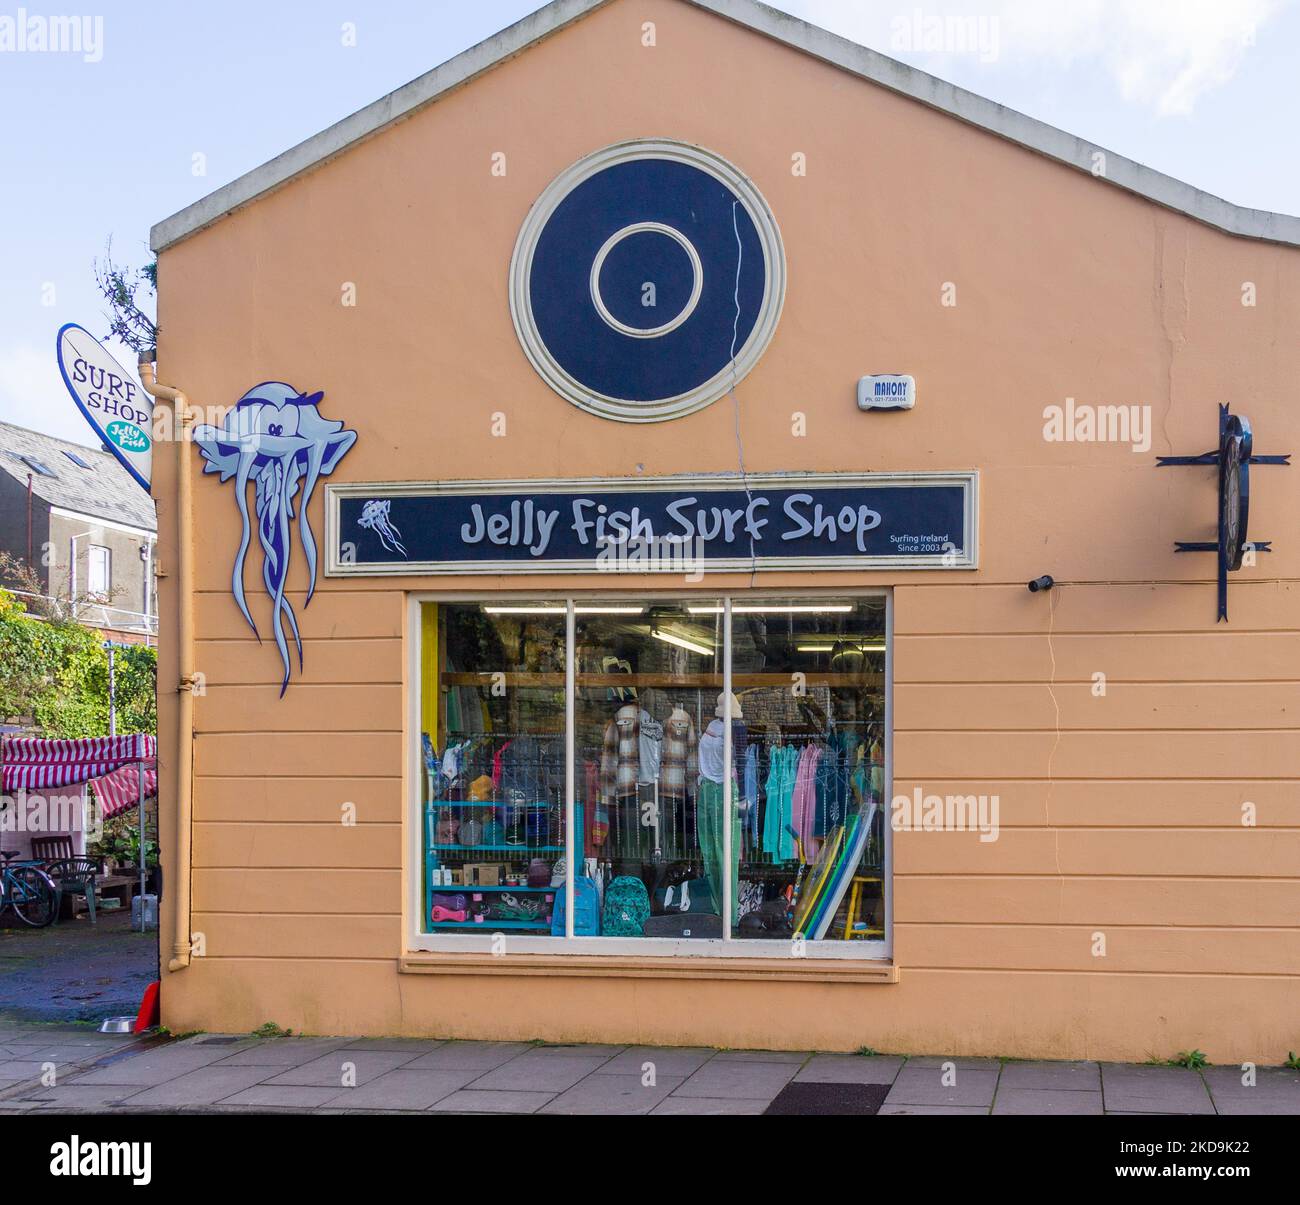 Surf shop with jelly fish sign Stock Photo